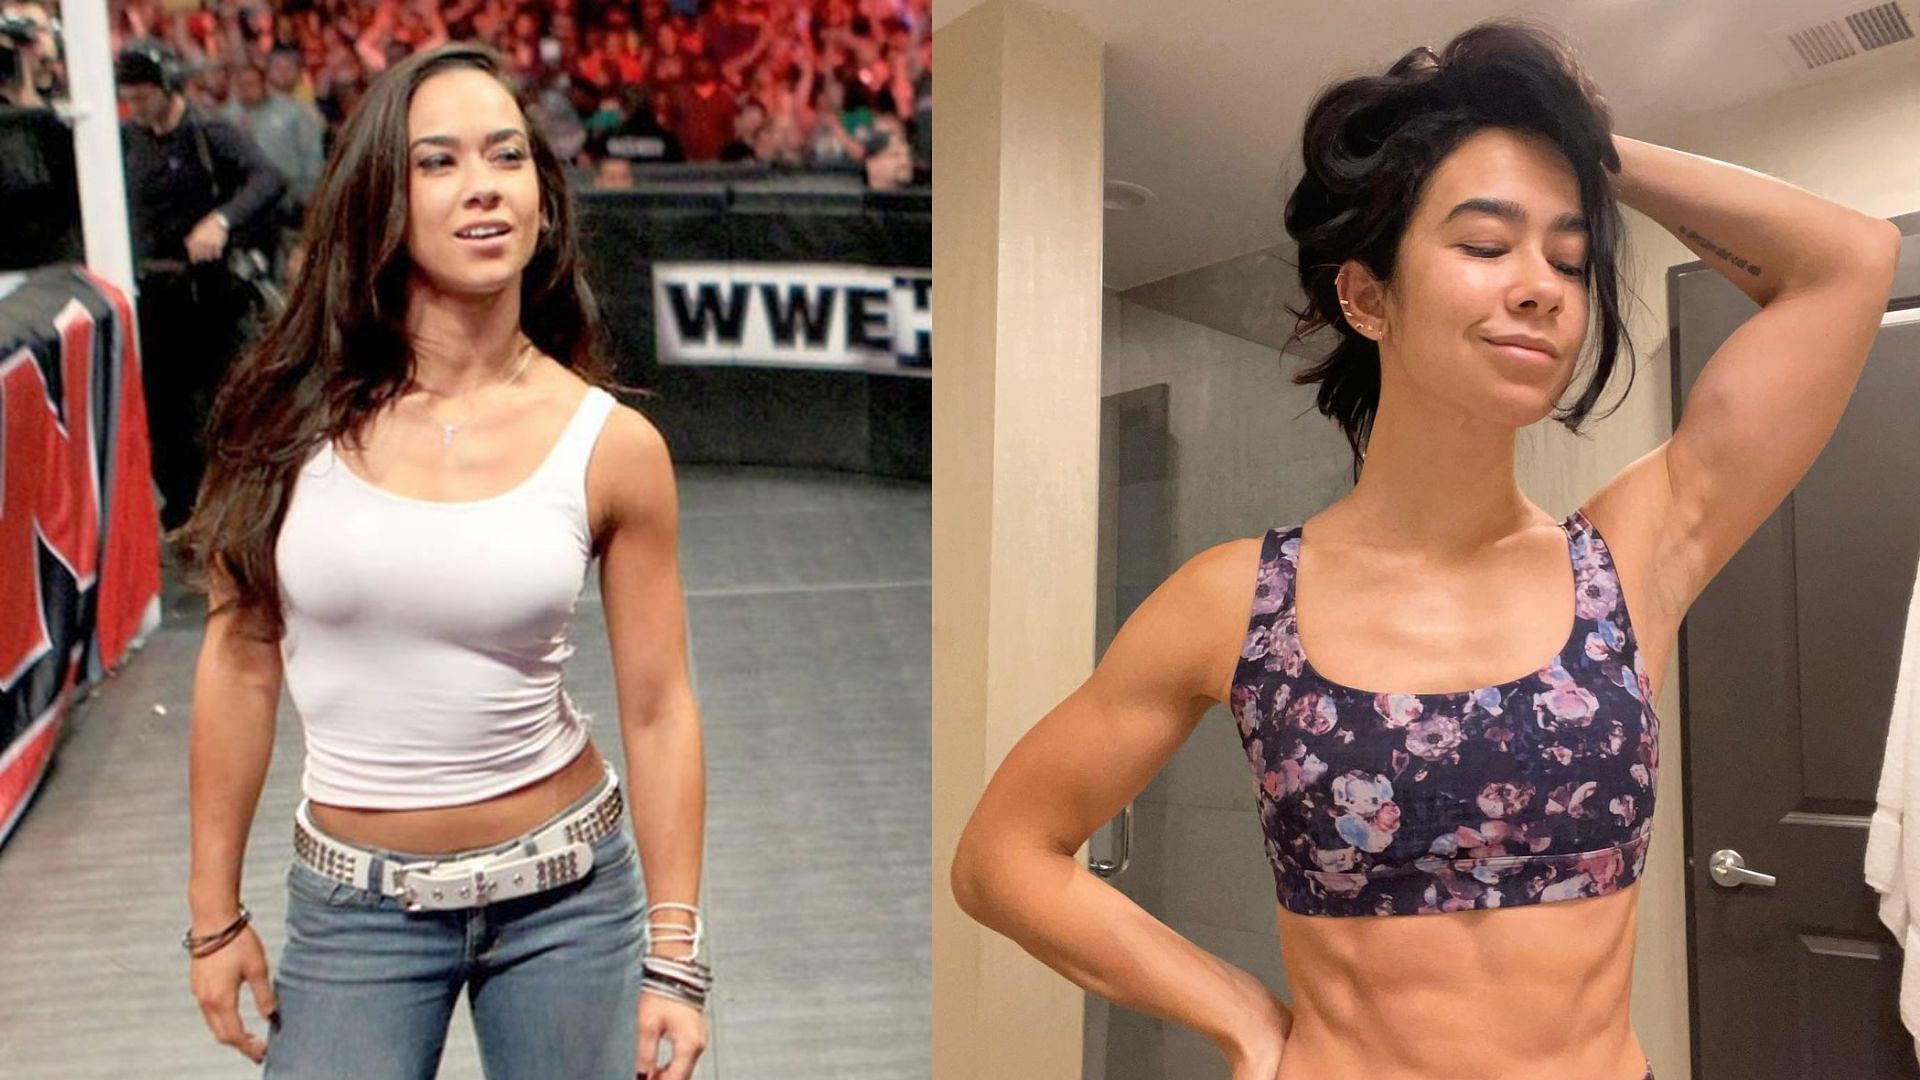 AJ Lee has not been idle while away from wrestling